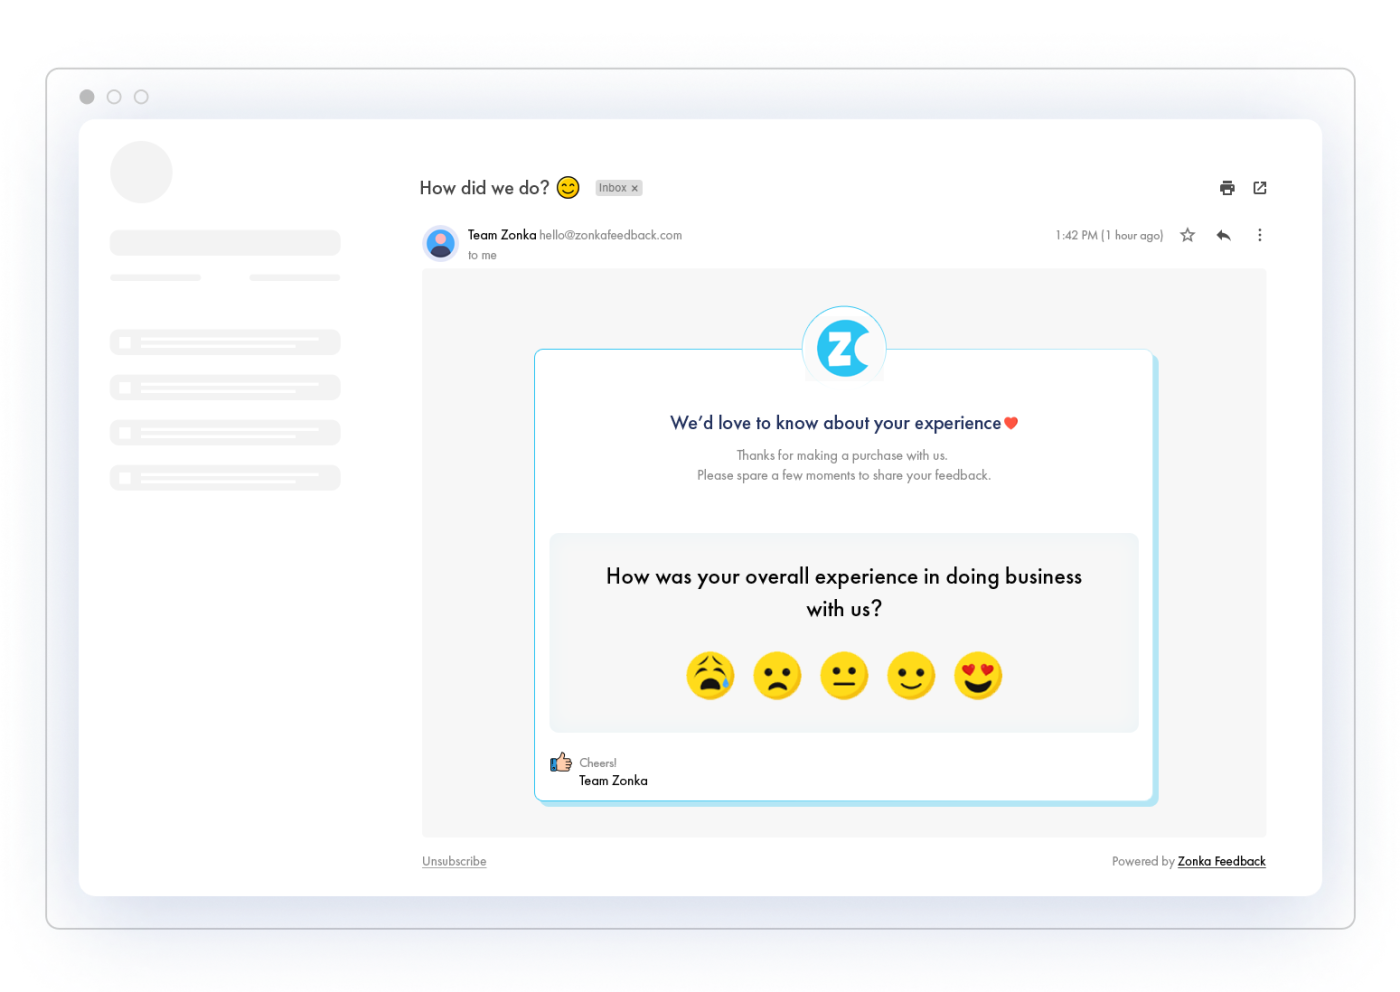 Customer satisfaction survey with five smiley faces embedded in an email body